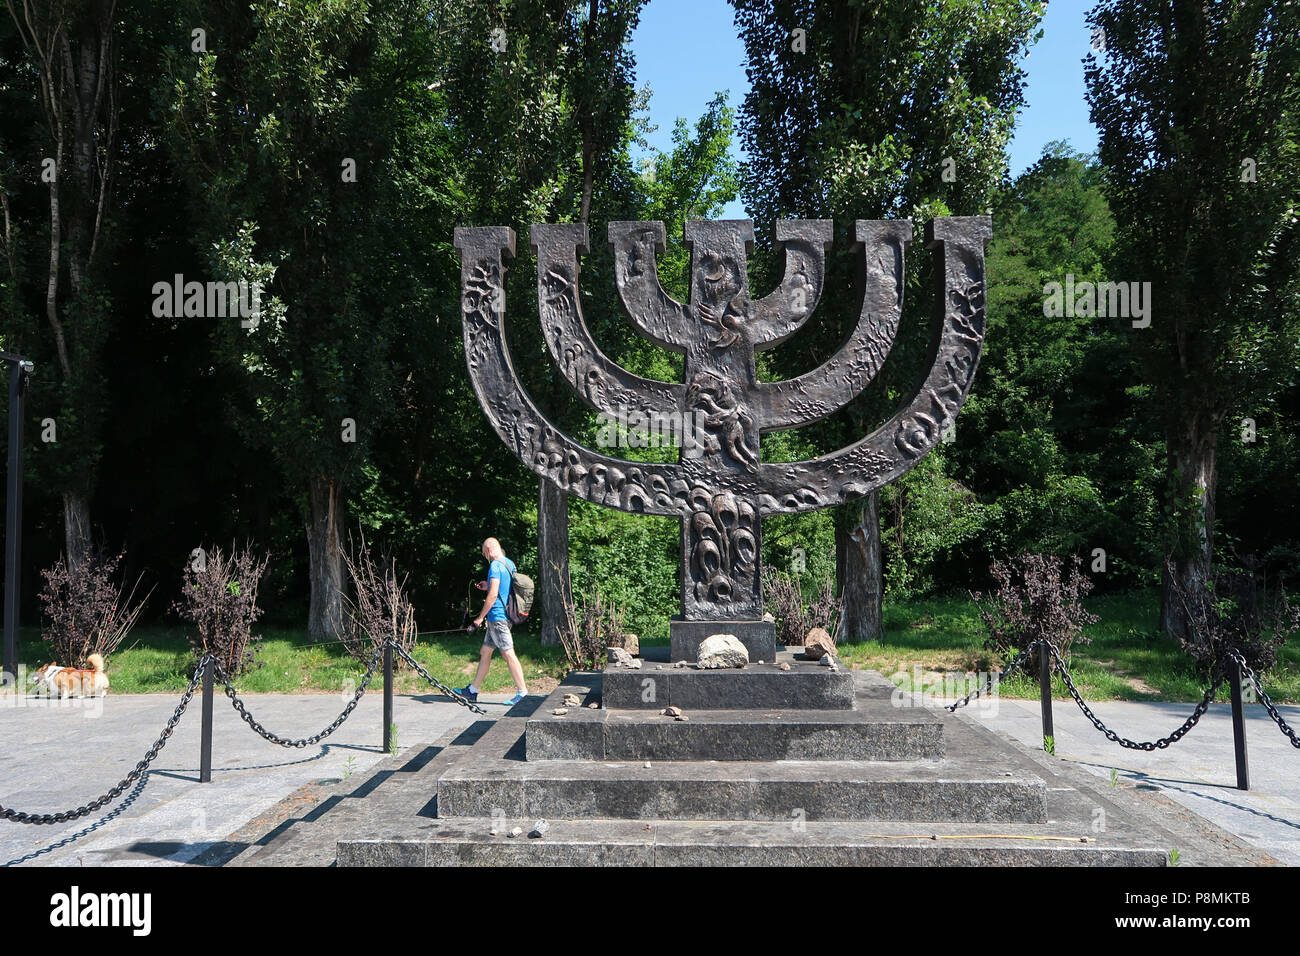 Menorah-shaped monument to the Jews (about 100,000) massacred at Babi Yar a site of massacres carried out by German forces and by local Ukrainian collaborators during their campaign against the Soviet Union in World War II in the suburbs of Kiev capital of Ukraine Stock Photo